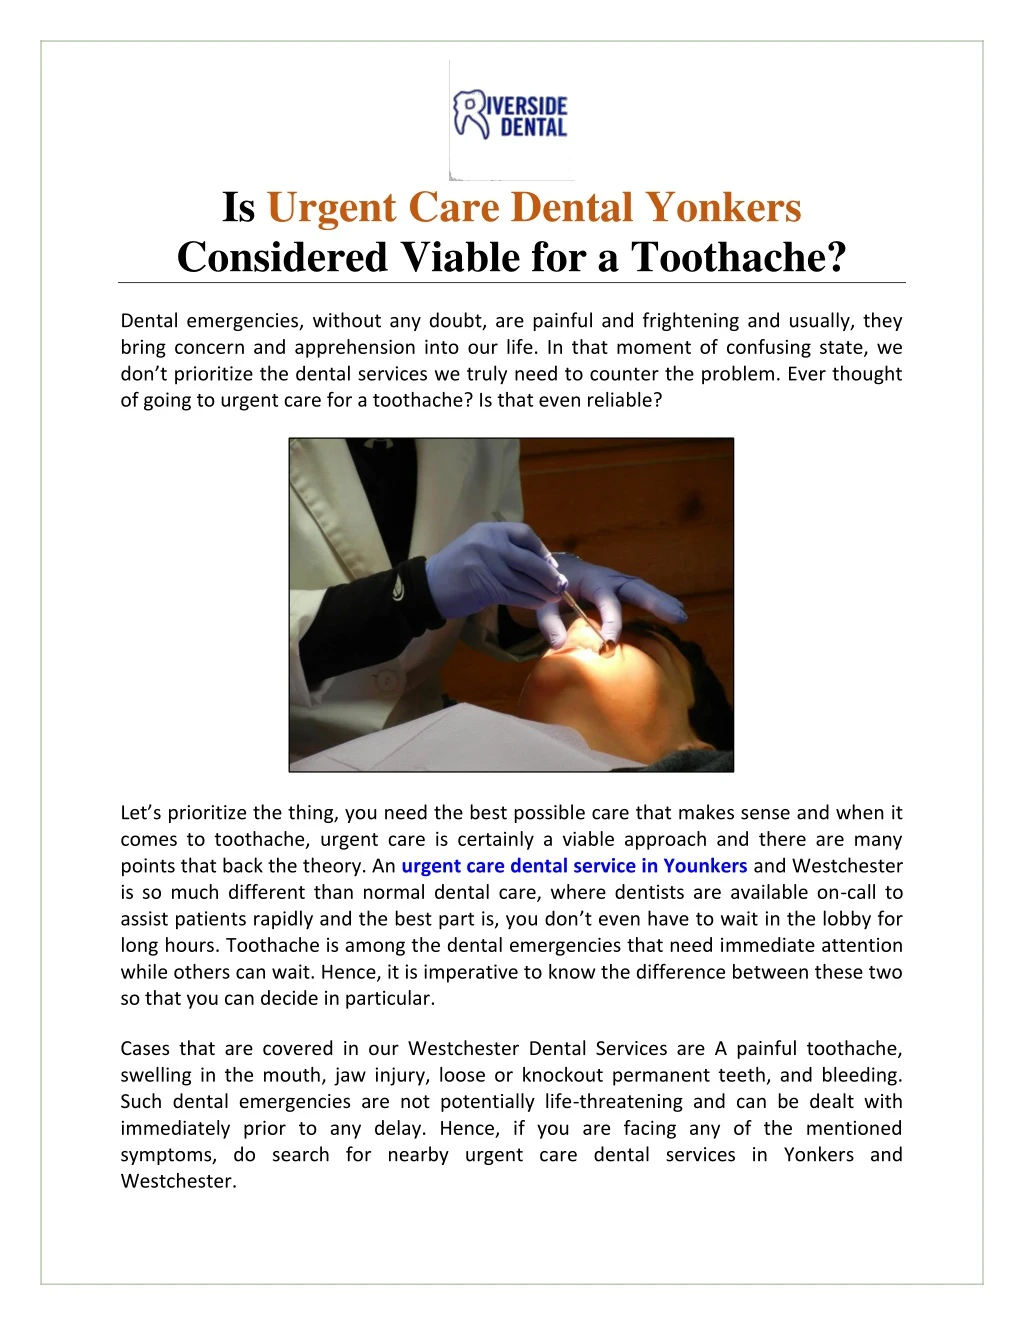 is urgent care dental yonkers considered viable